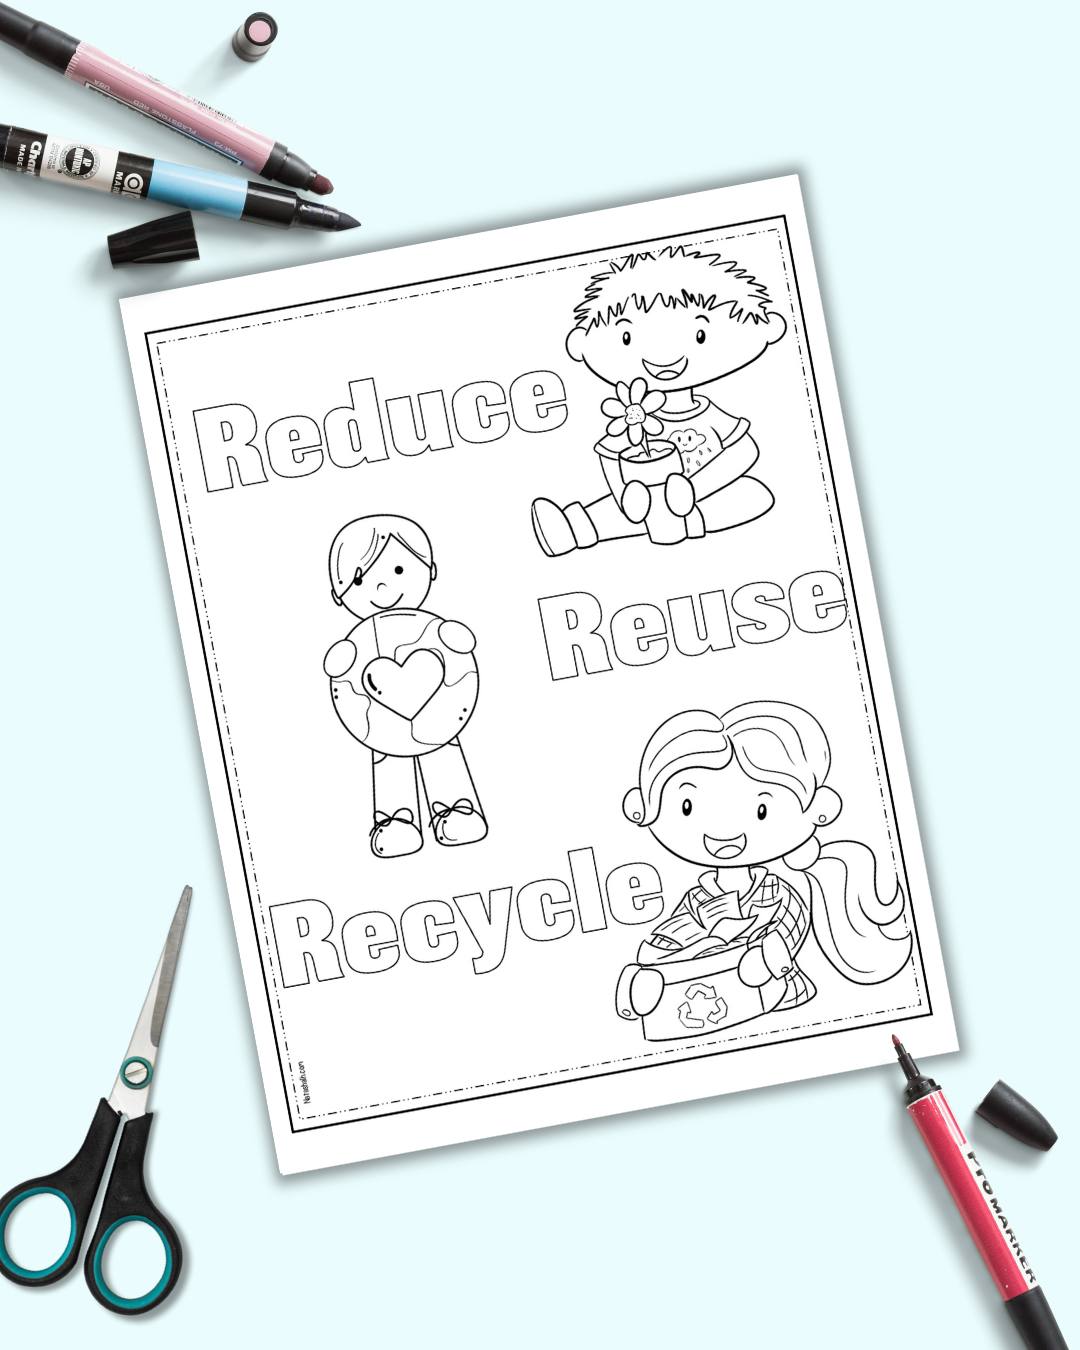 A coloring page with the text "reduce, reuse, recycle" and there children to color